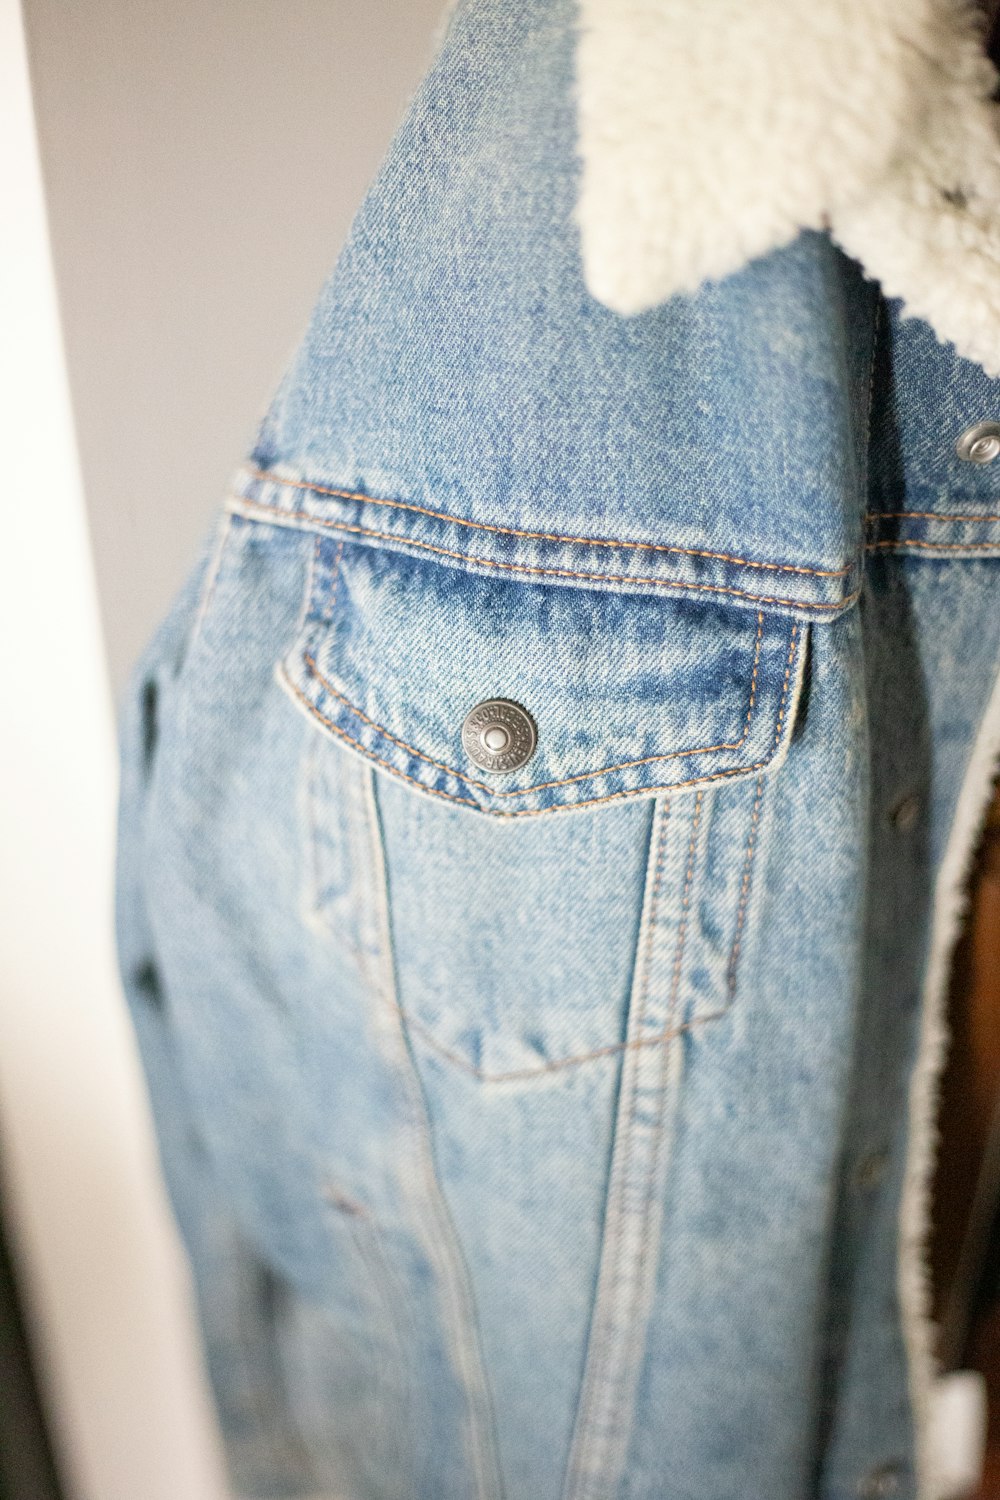 a denim jacket with a fur collar hanging on a wall